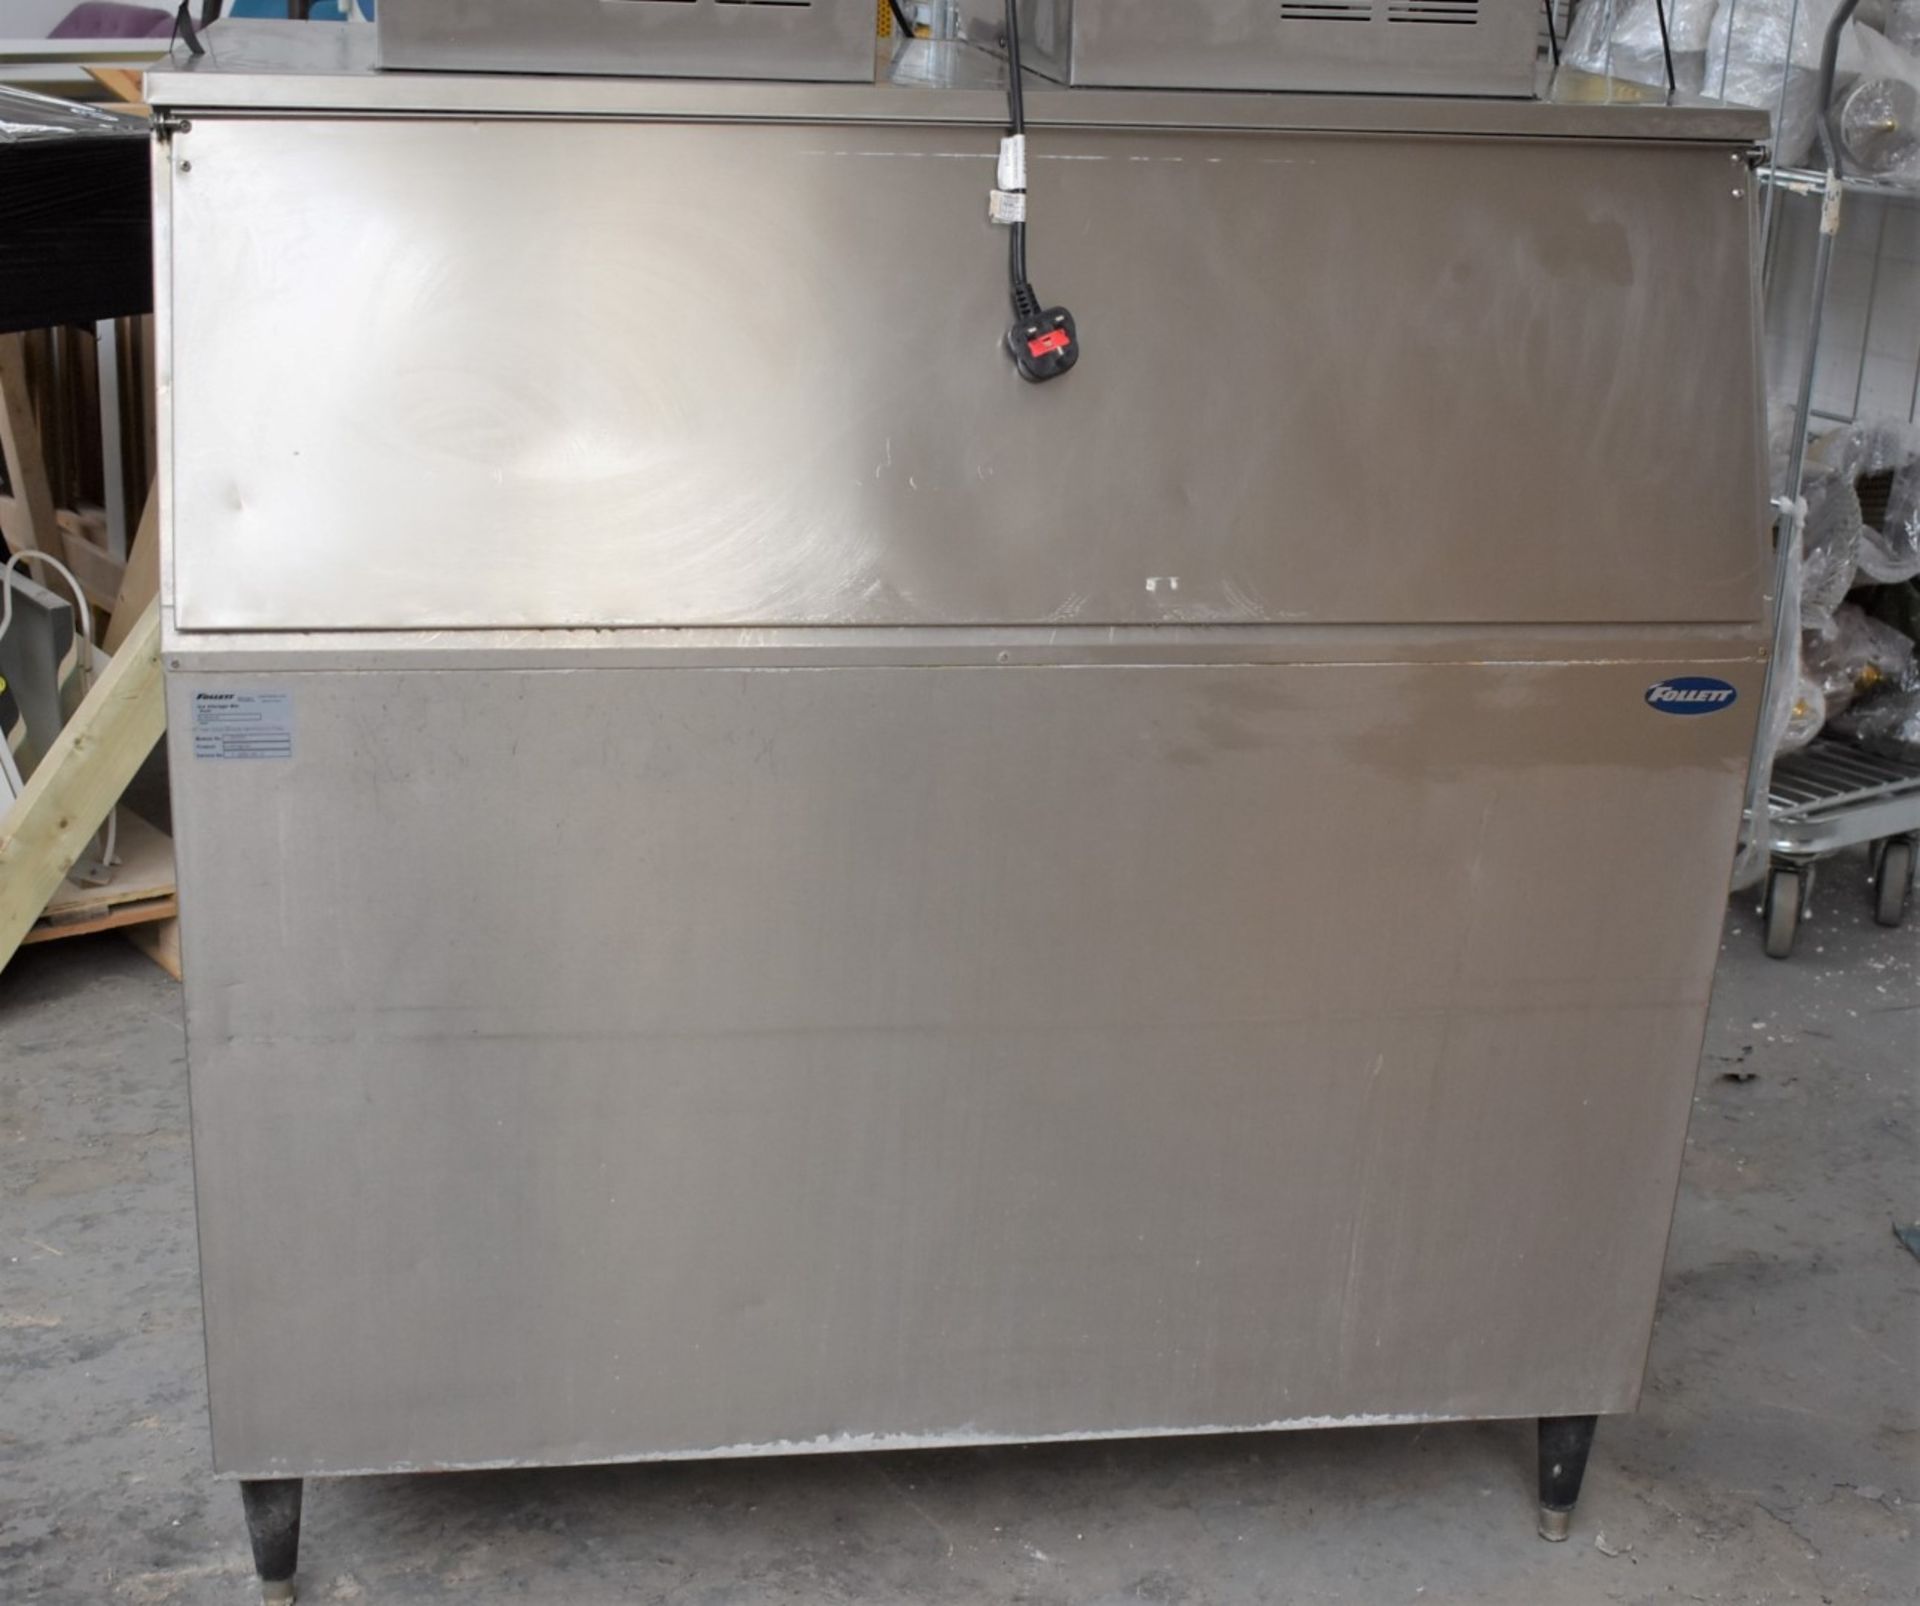 1 x Commercial Ice Maker With a Follett 431kg Ice Hopper and Two Ice Cool ICS700 Ice Making Heads - Image 7 of 15